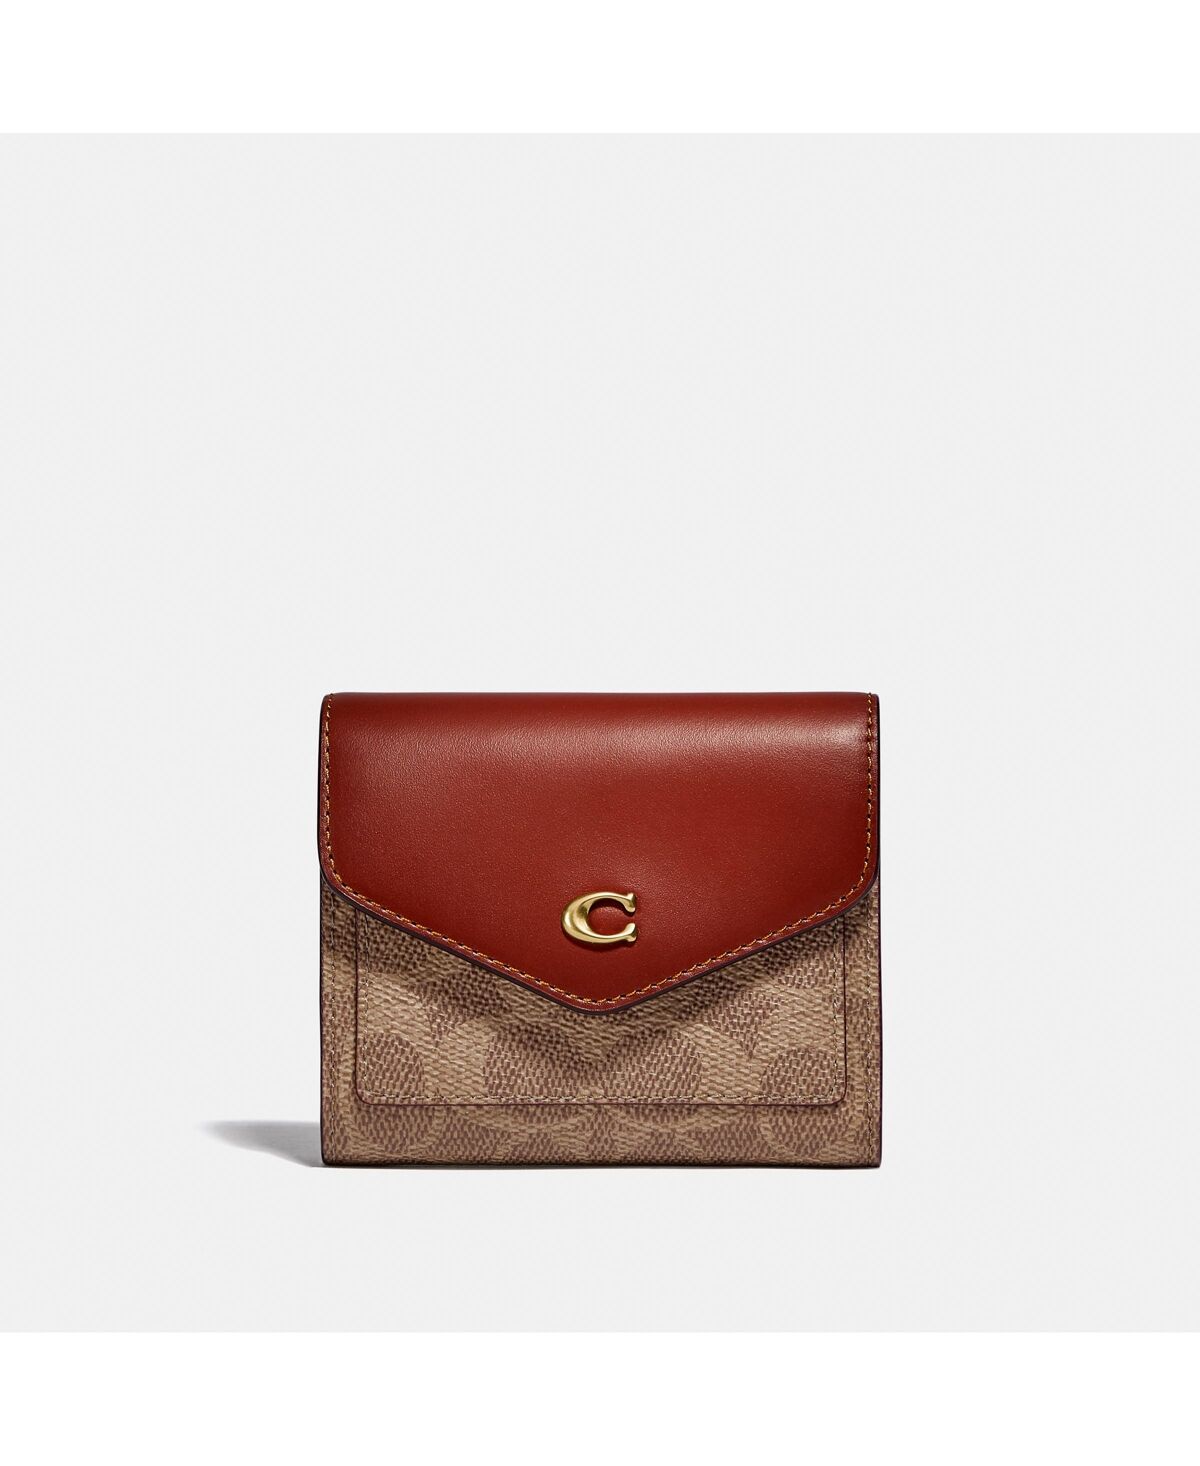 Coach Wyn Small Leather Wallet In Colorblock Signature Canvas - Tan Rust